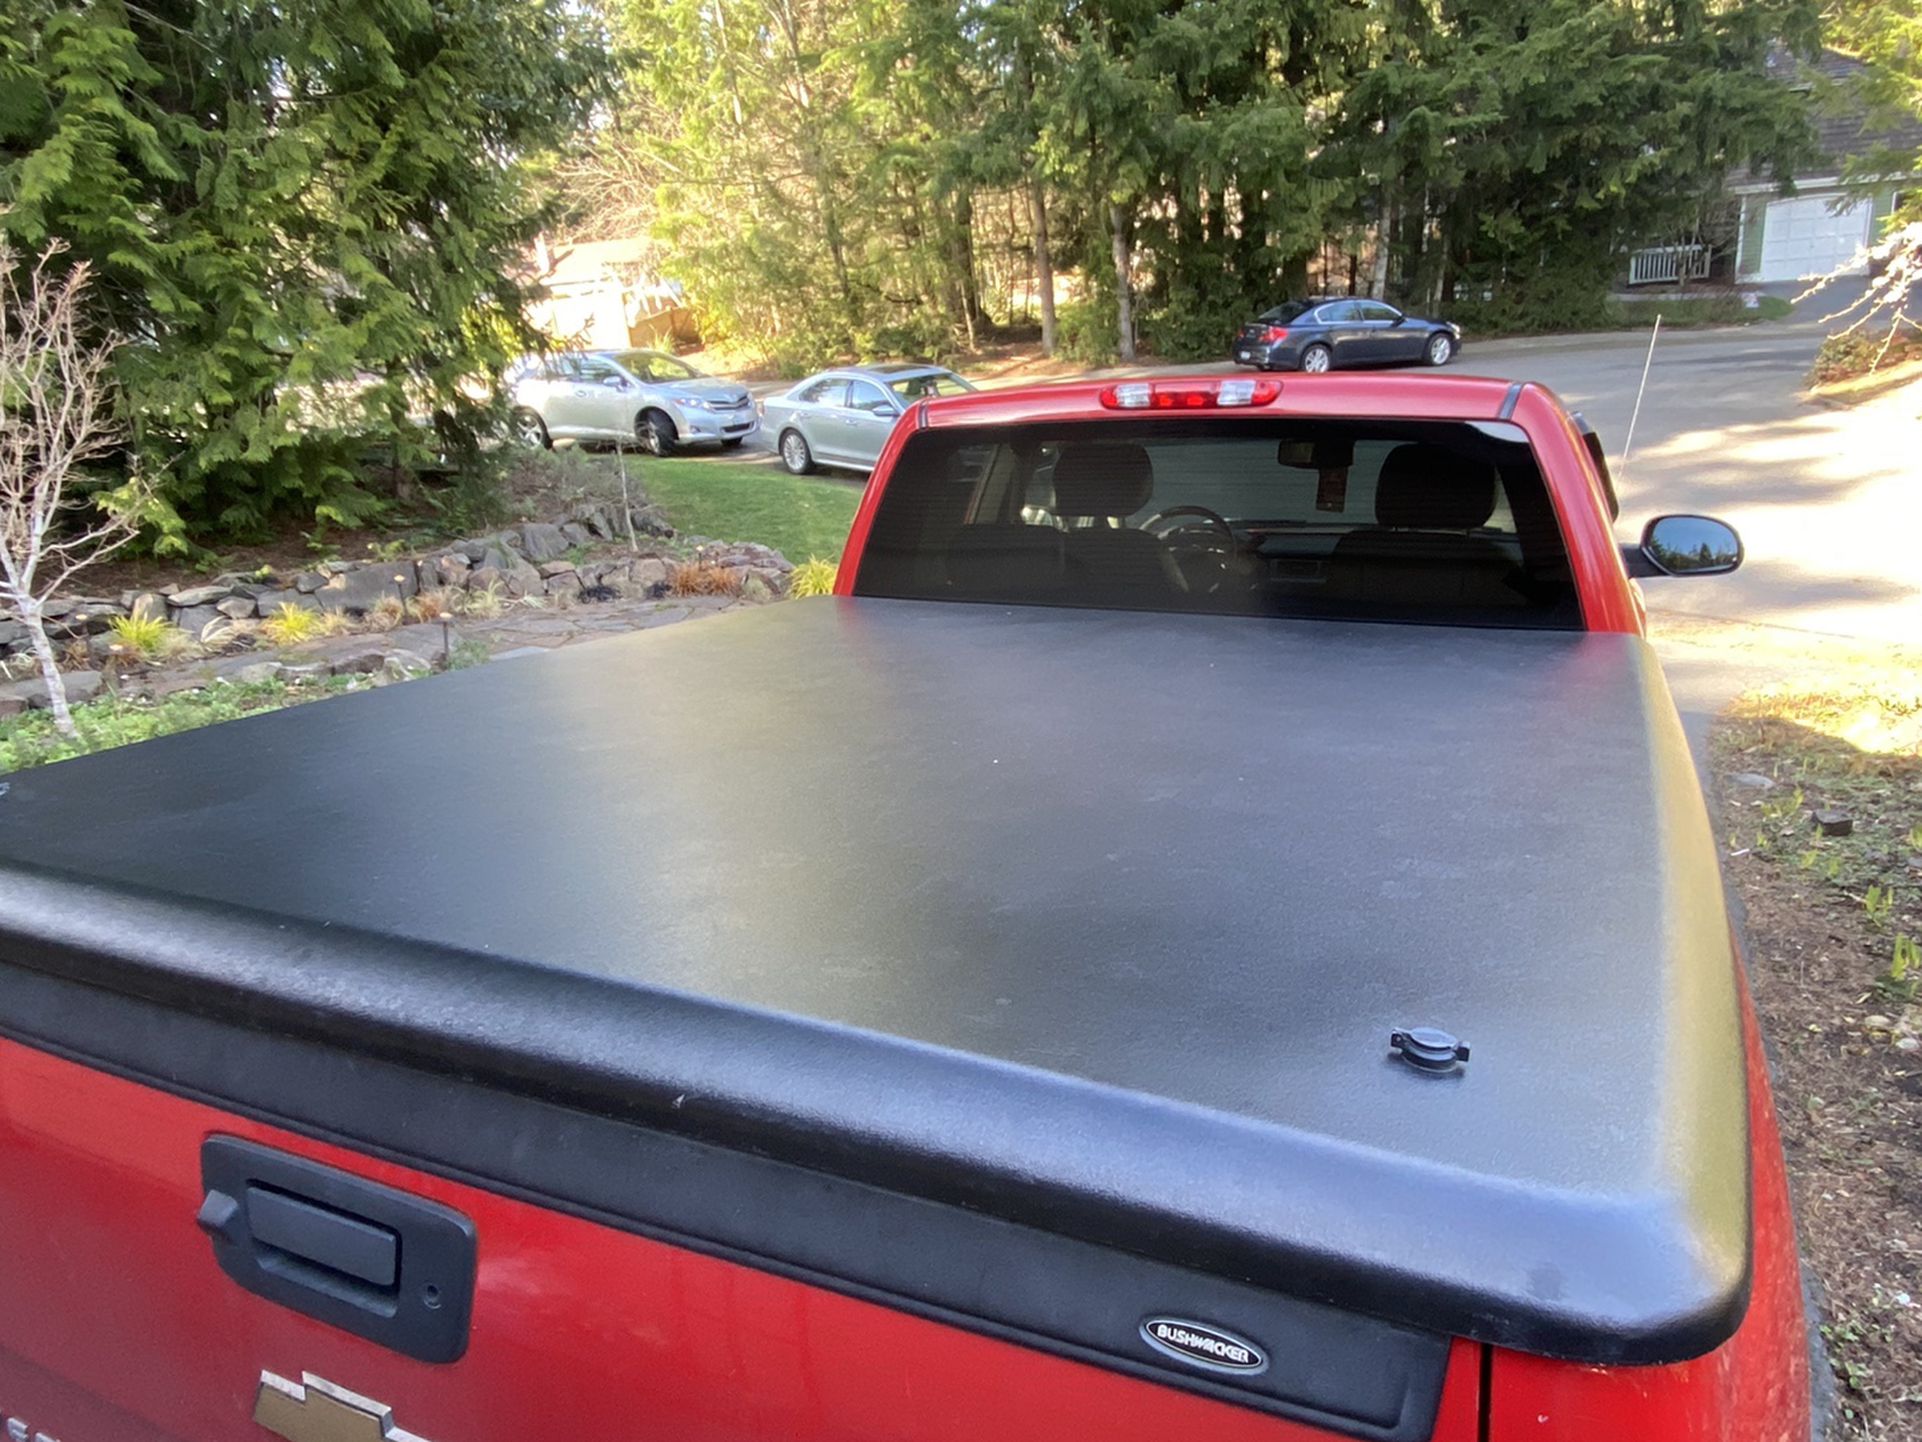 Undercover Classic Truck Bed Cover Fits 6’7” Bed